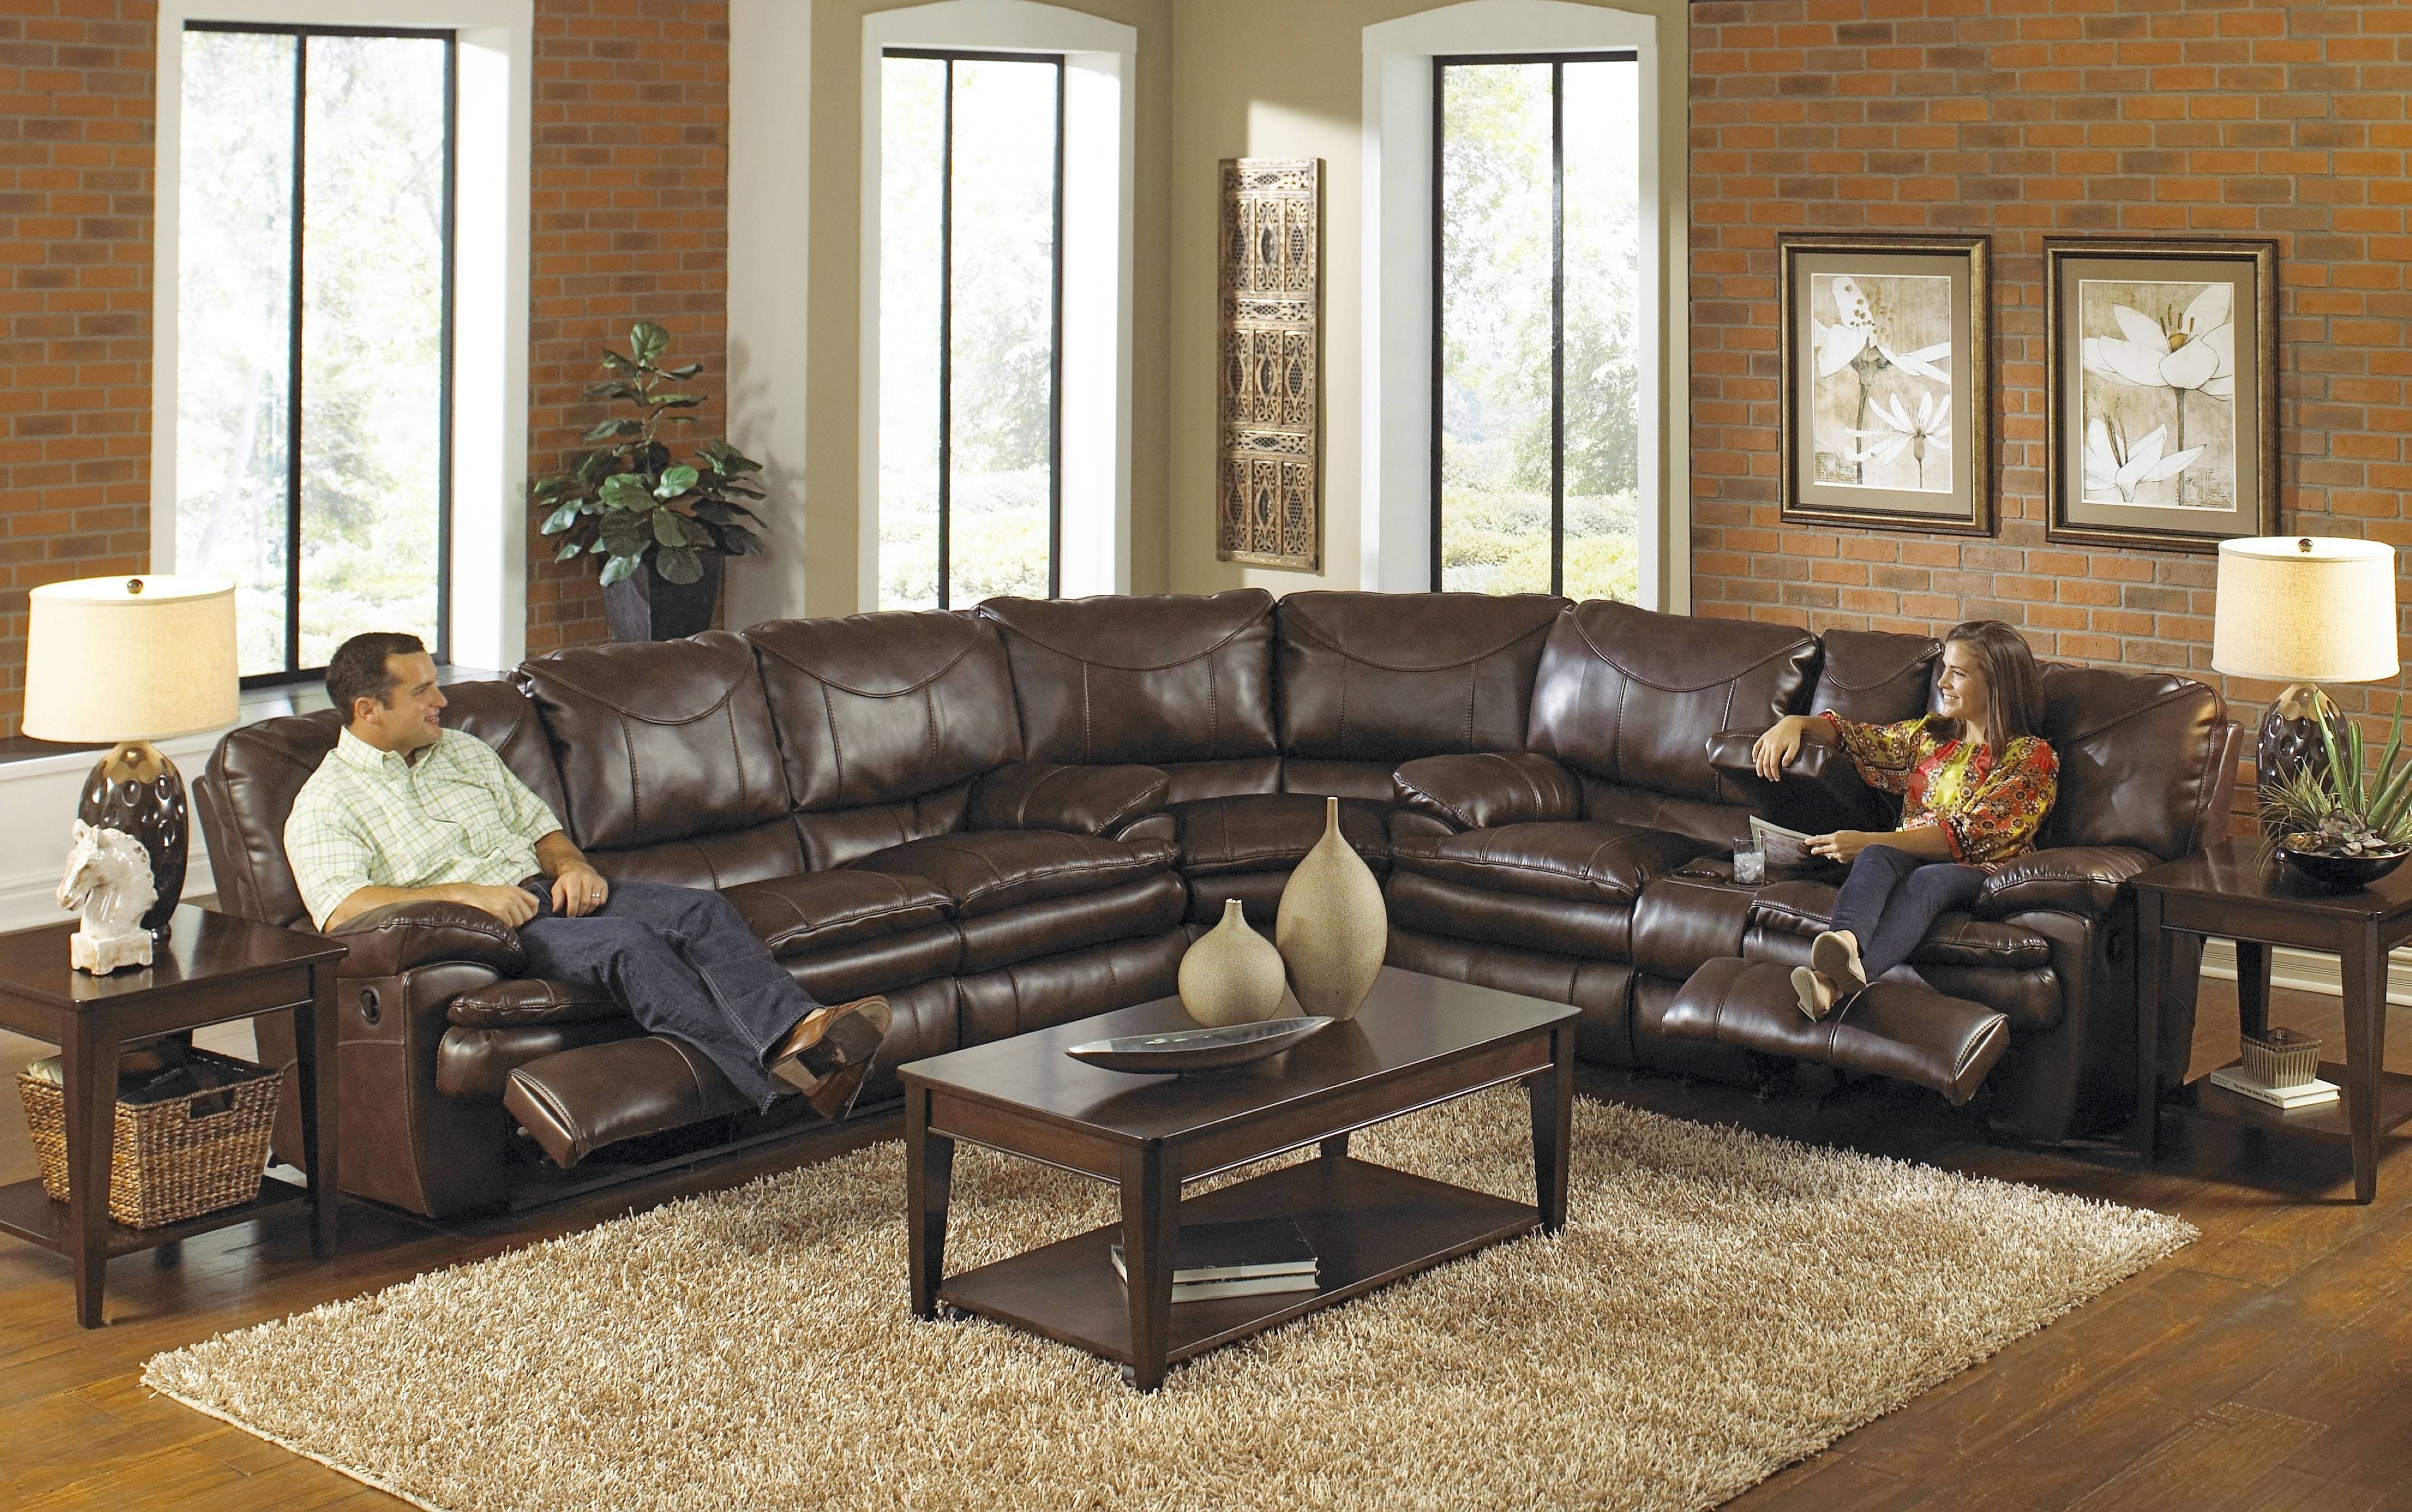 Wonderful Sectional Sleeper Sofa With Recliners 75 About Remodel Inside Theatre Sectional Sofas (View 8 of 30)